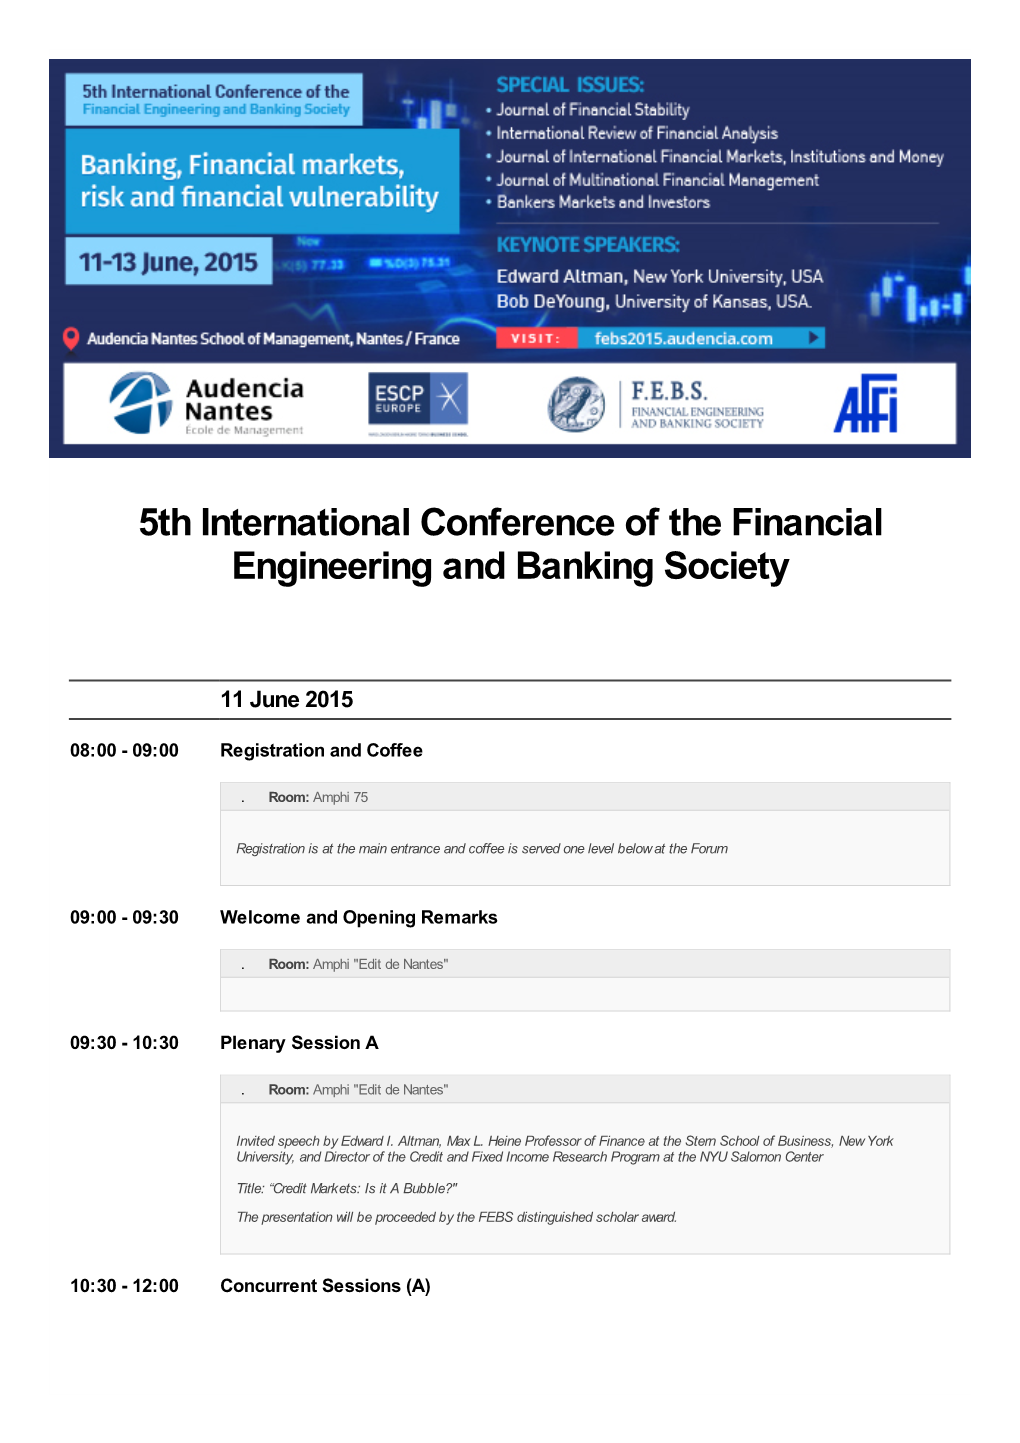 5Th International Conference of the Financial Engineering and Banking Society